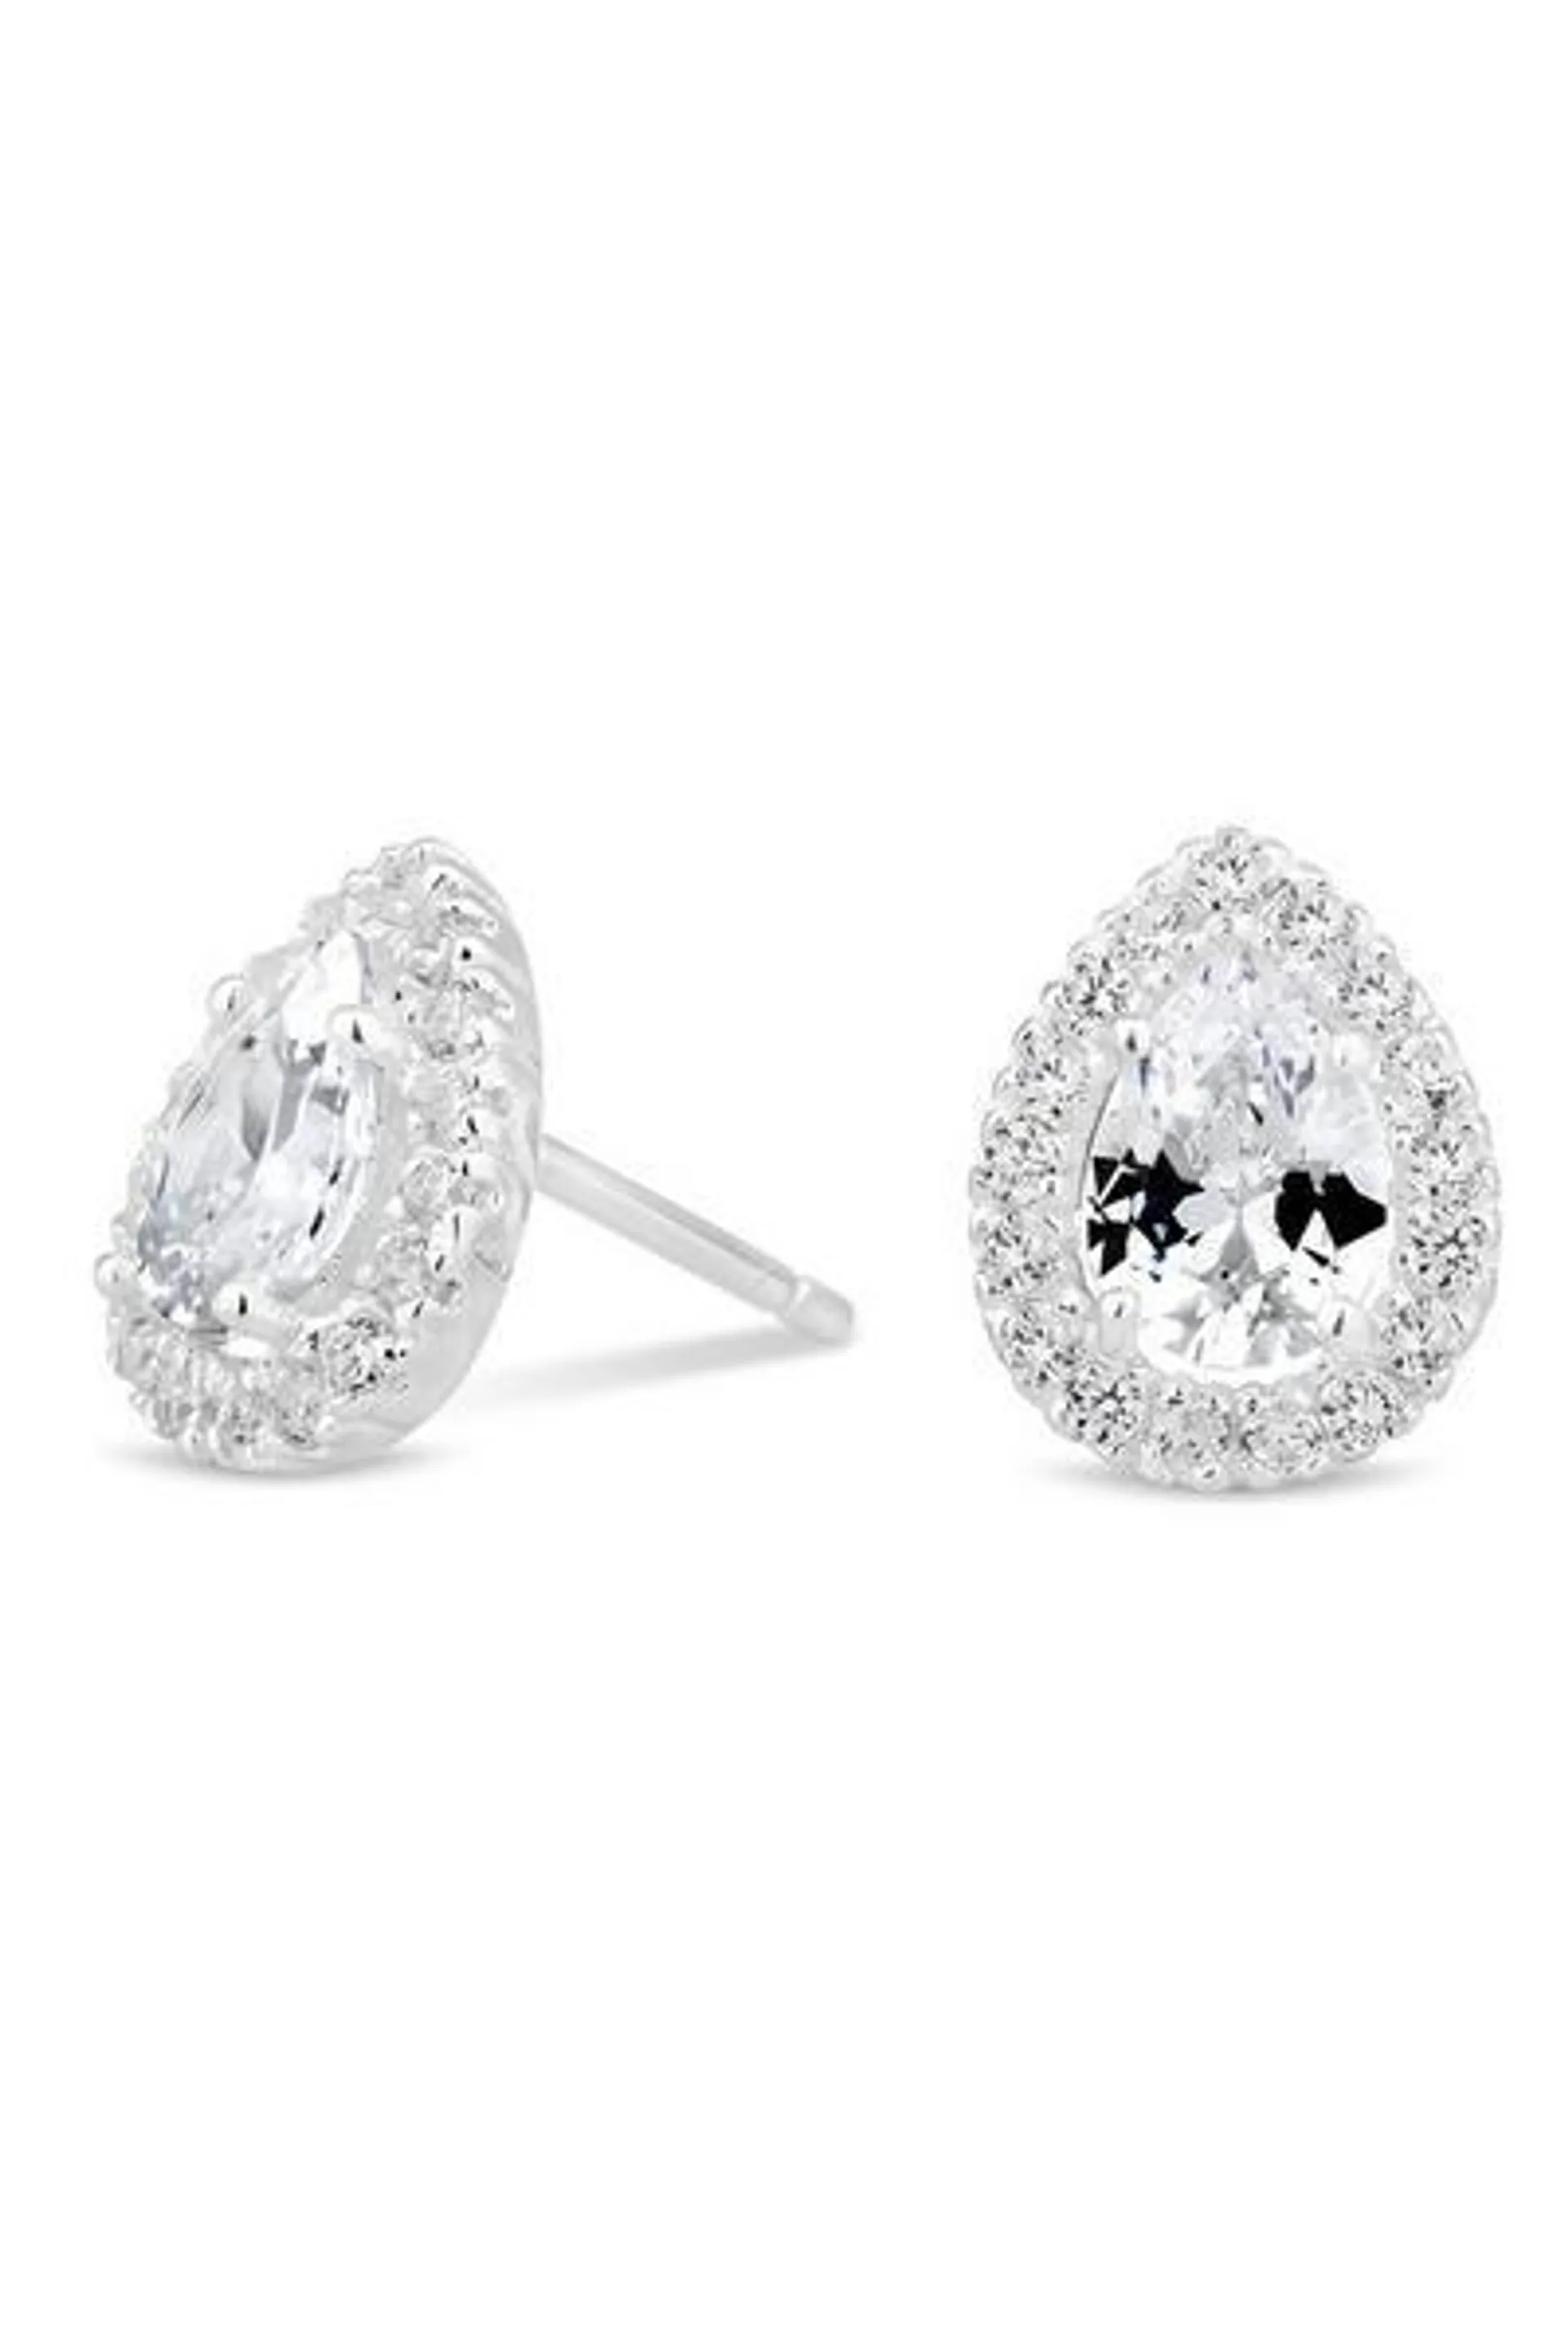 Sterling Silver 925 With Cubic Zirconia Halo Pear Stud Earrings